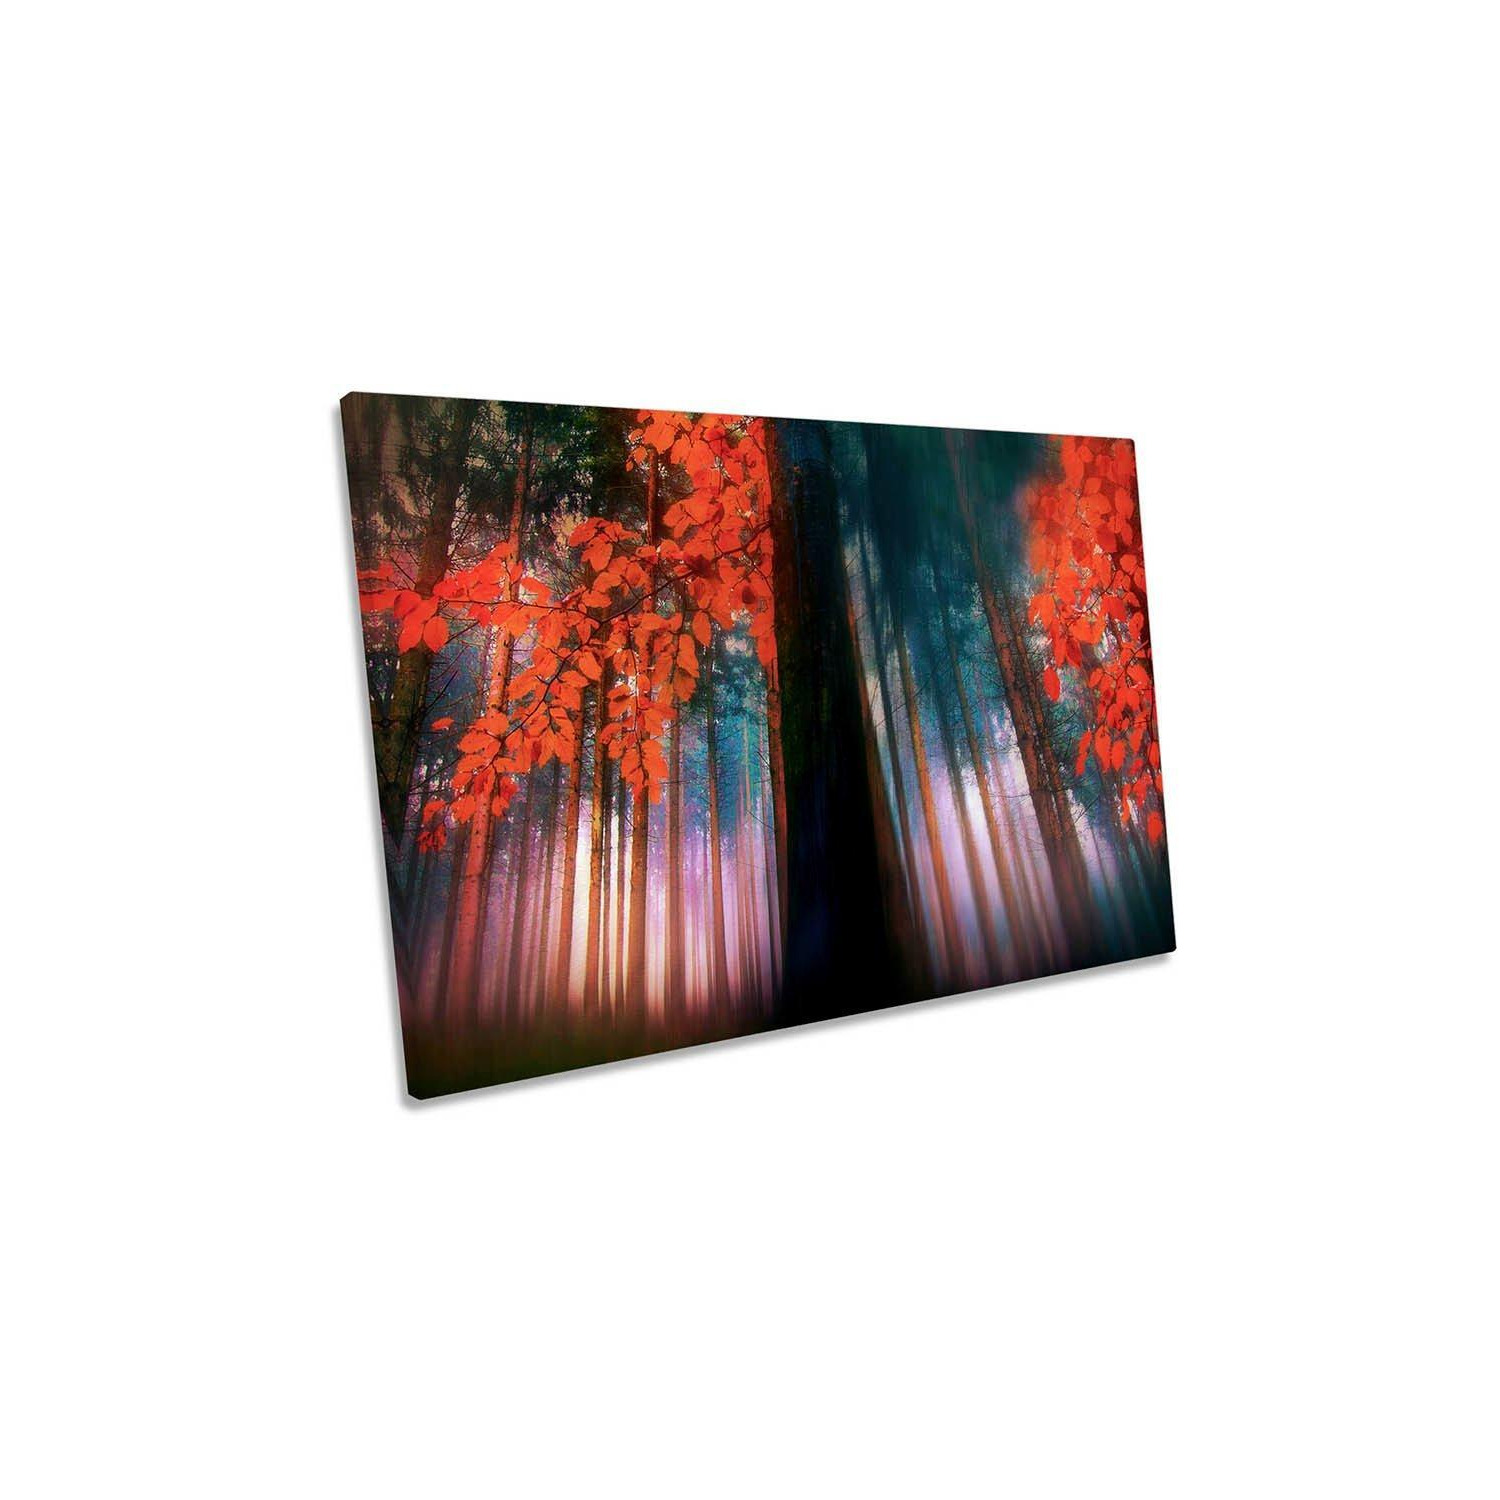 Euphoria Red Autumn Forest Canvas Wall Art Picture Print - image 1